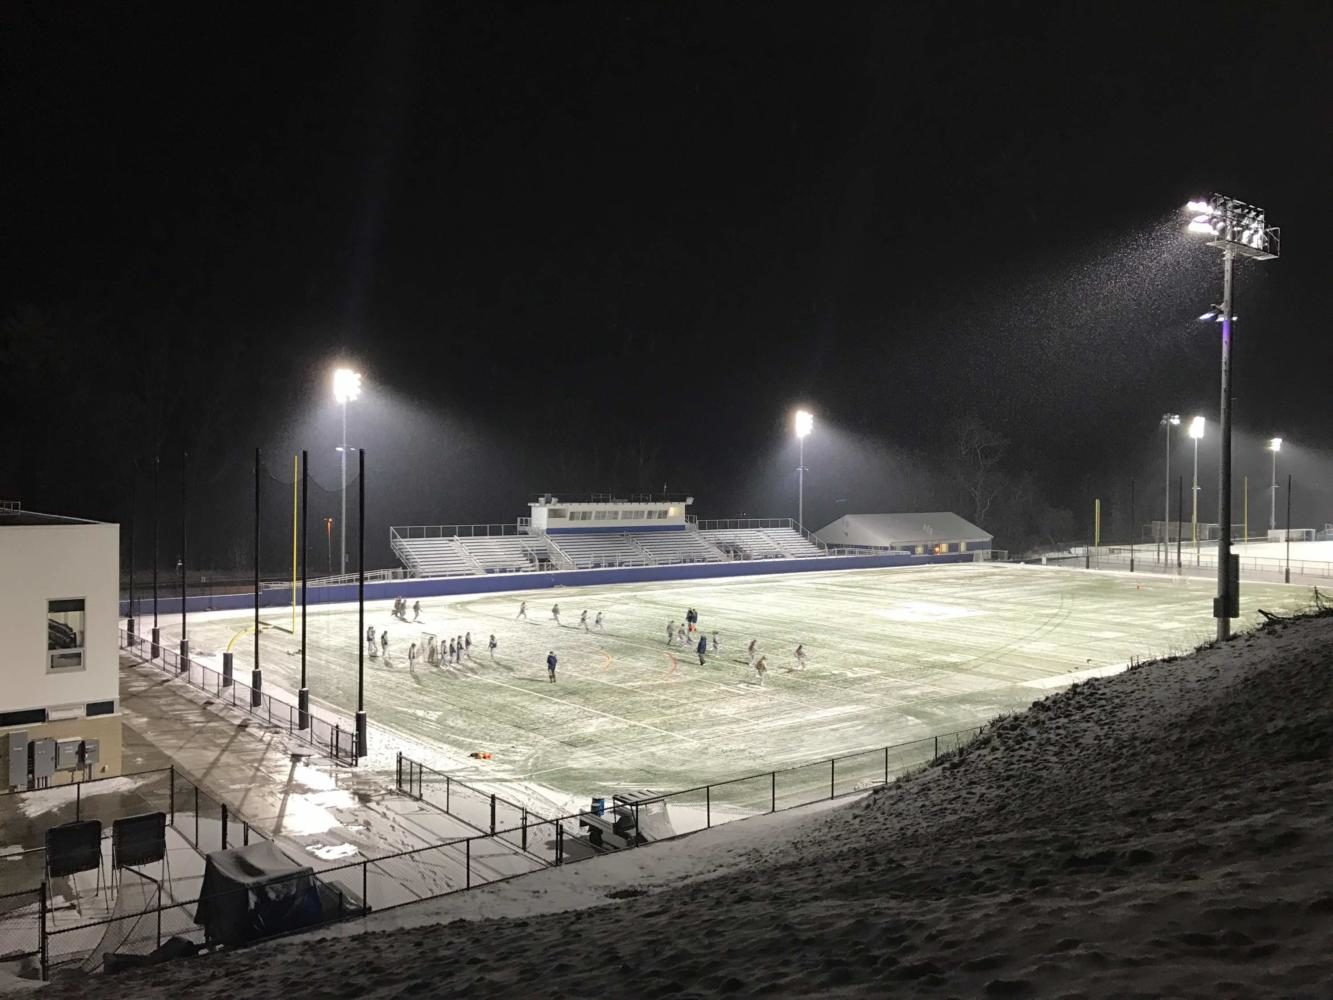 Paces+football+field+at+night.+Photo+by+Joseph+Tucci